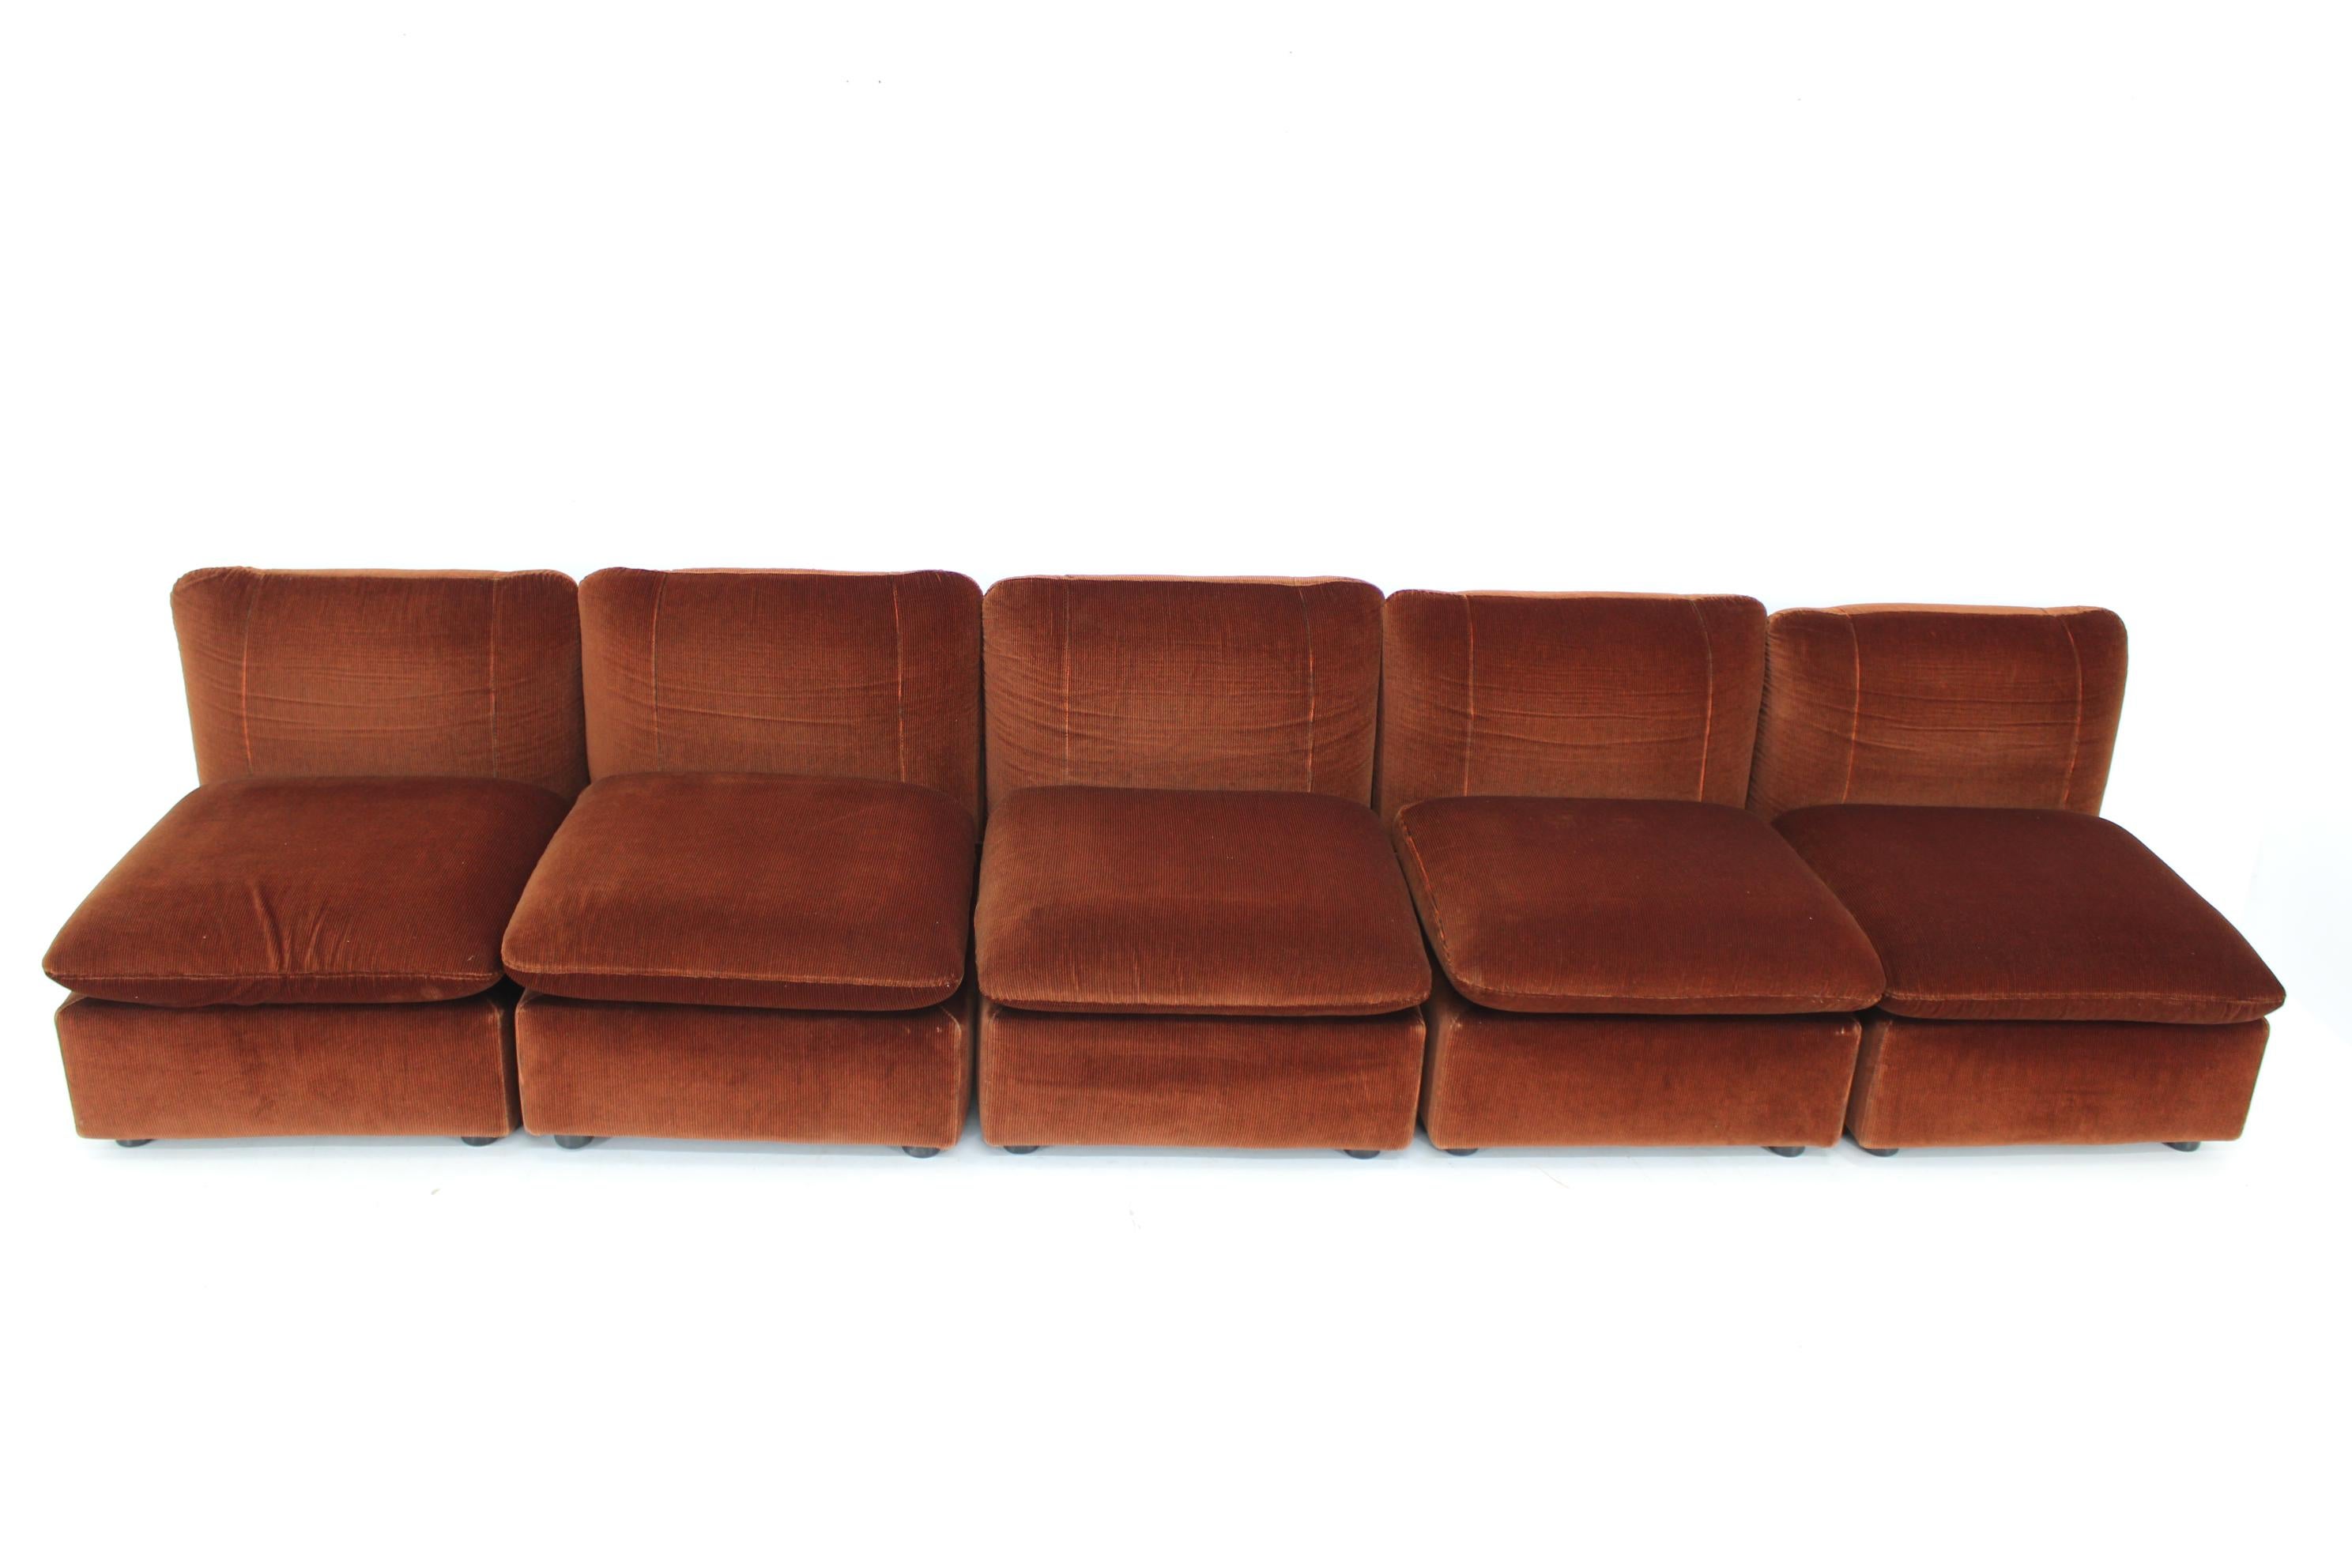 Mid-Century Modern 1970s Modular Sofa or Chairs, Italy For Sale